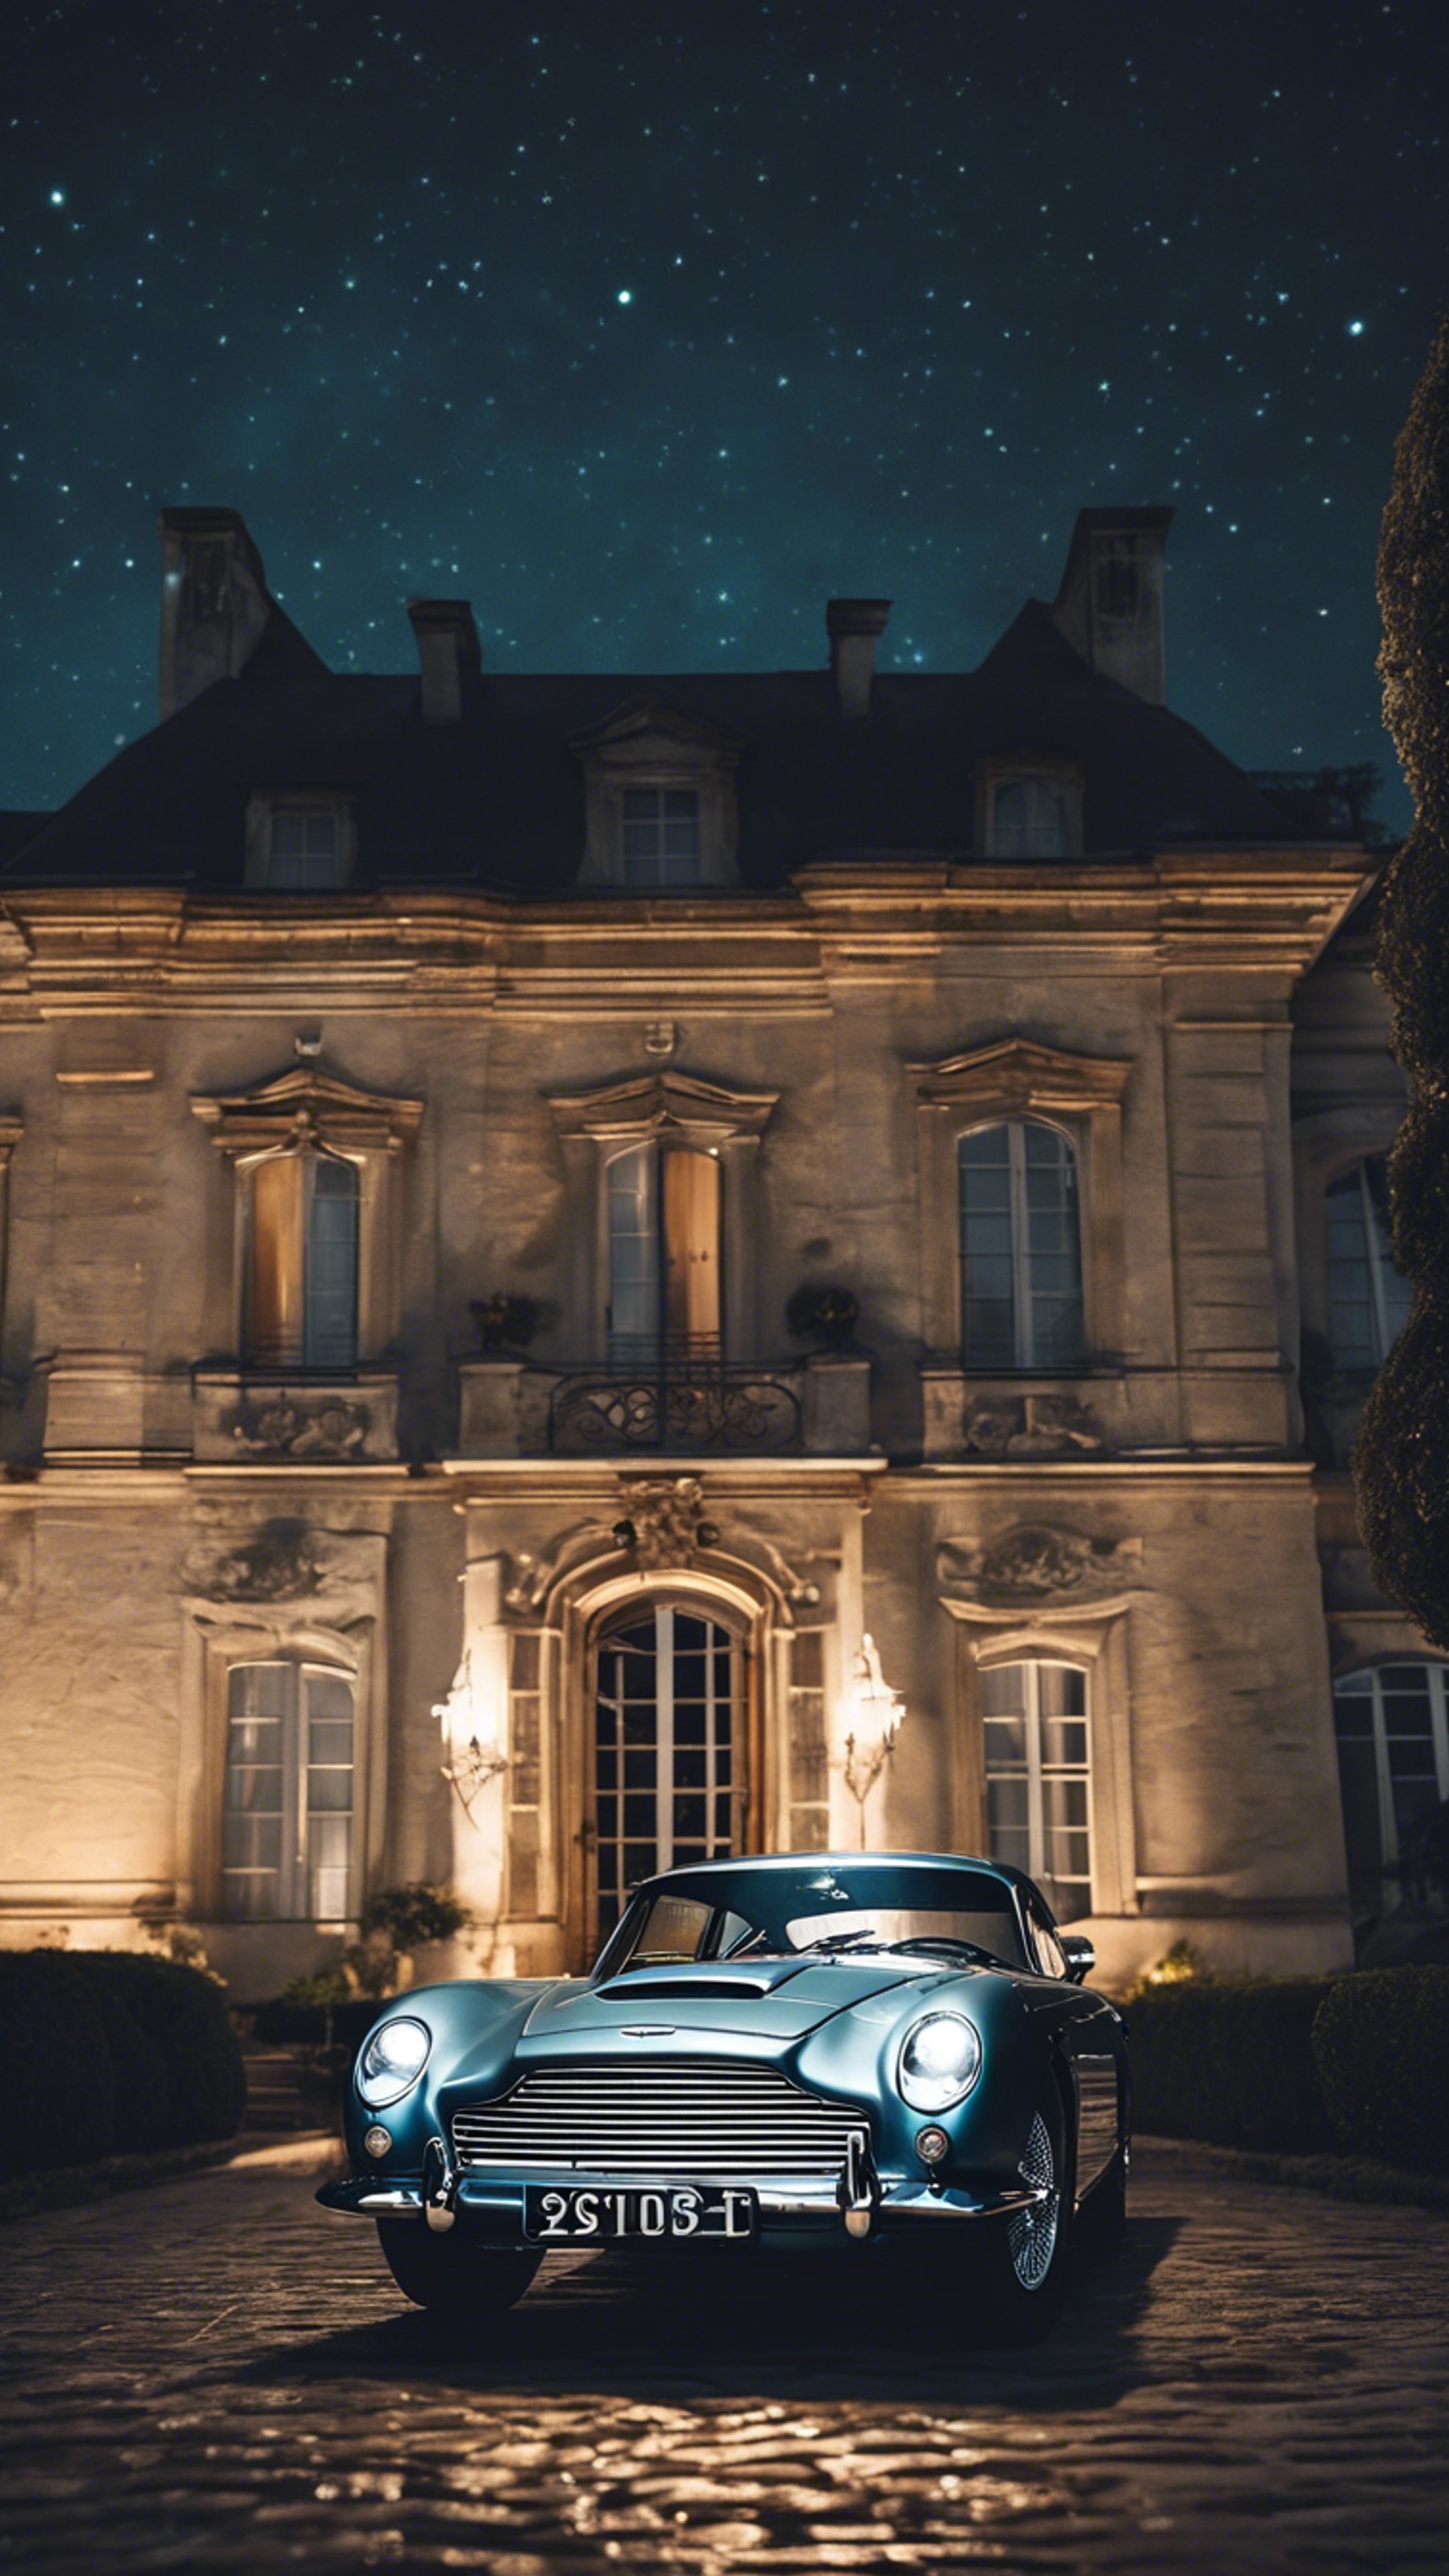 An Aston Martin DB5 under the night sky, parked in front of a luxurious French chateau. 벽지[481d4699df504b519845]